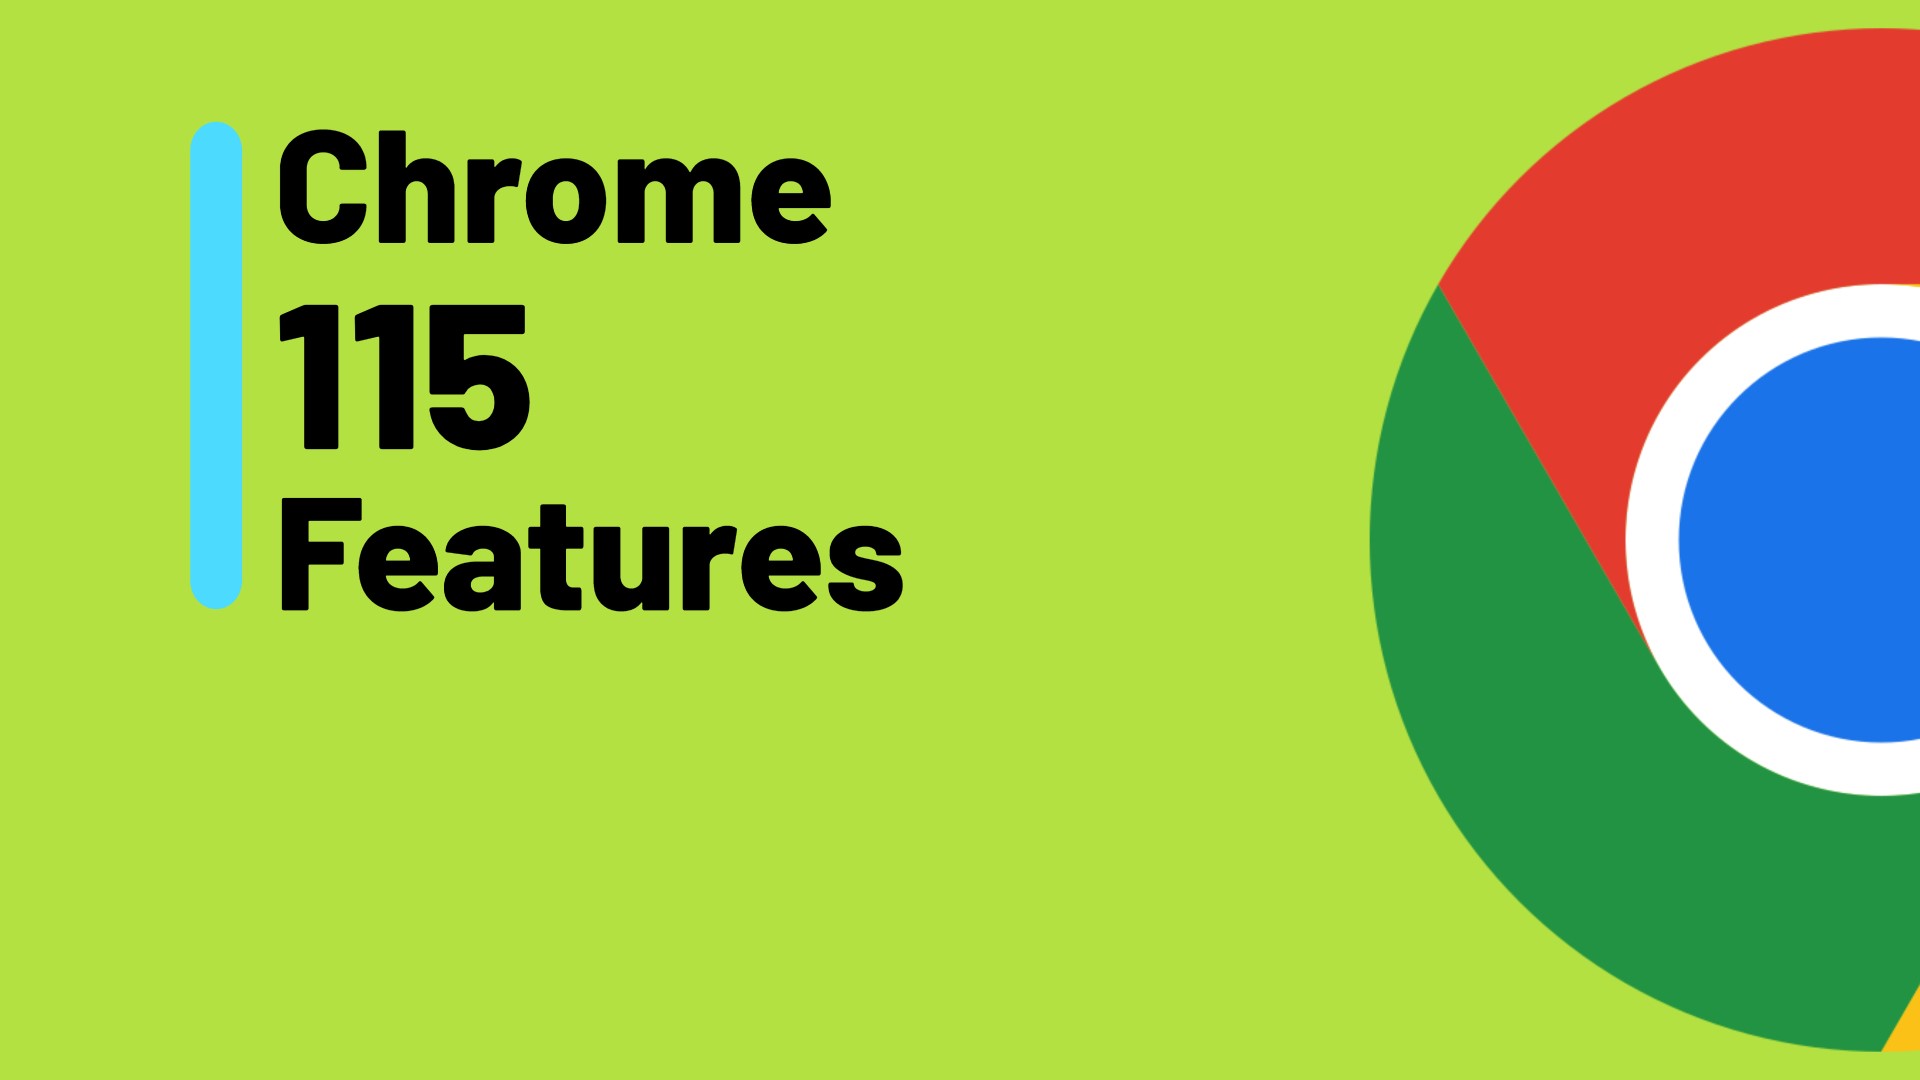 google chrome 115 brings exciting enhancements, but leaves advertisers fuming